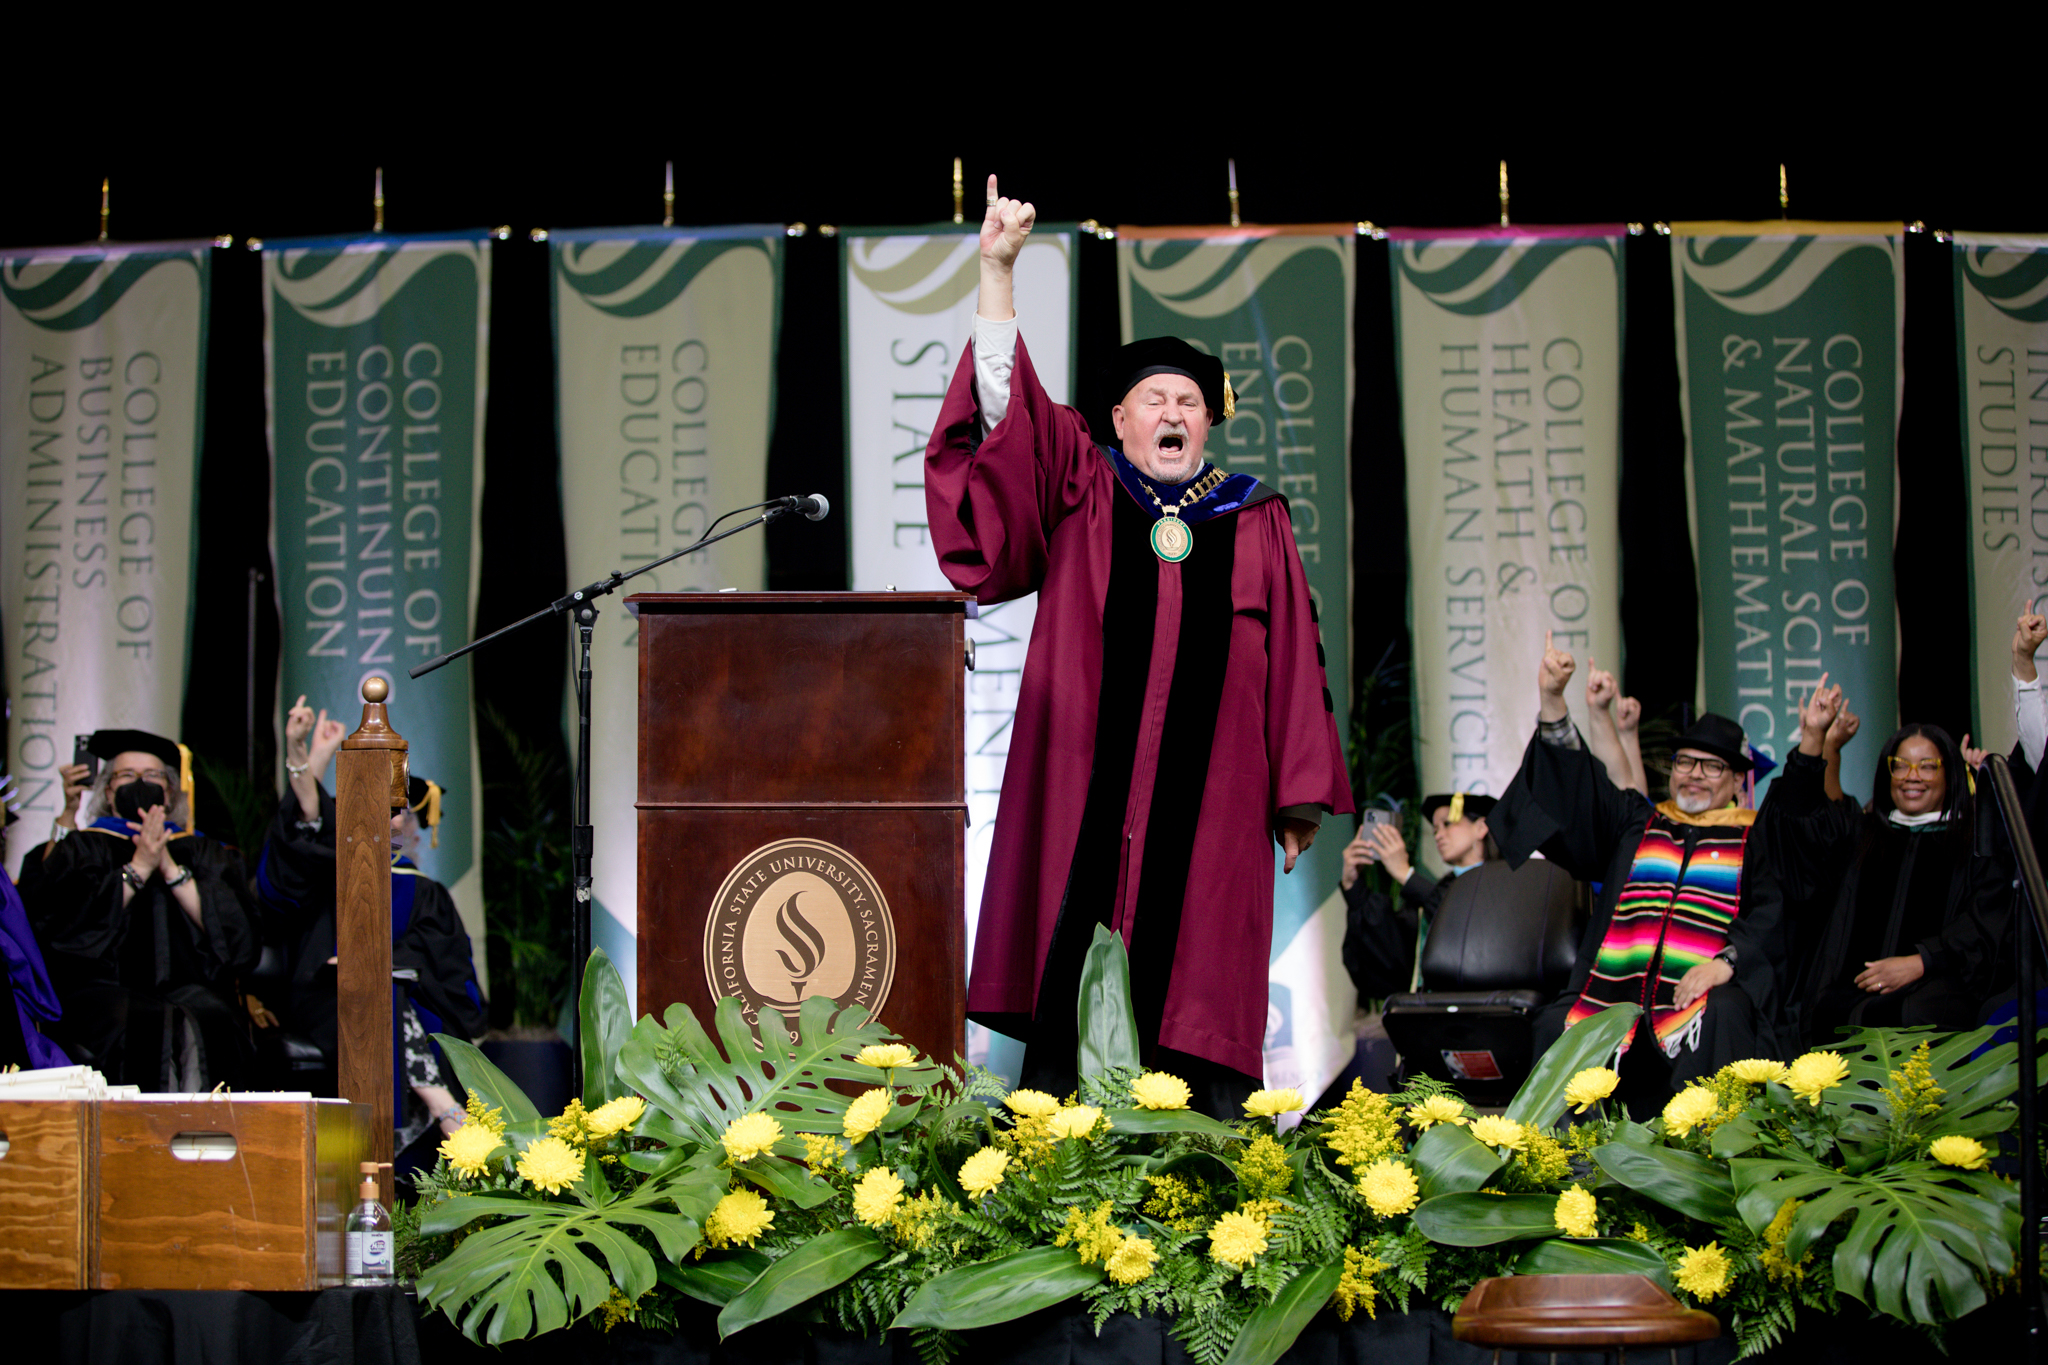 President Robert S. Nelsen, standing on the Commencement stage, giving the "Stingers Up" signal